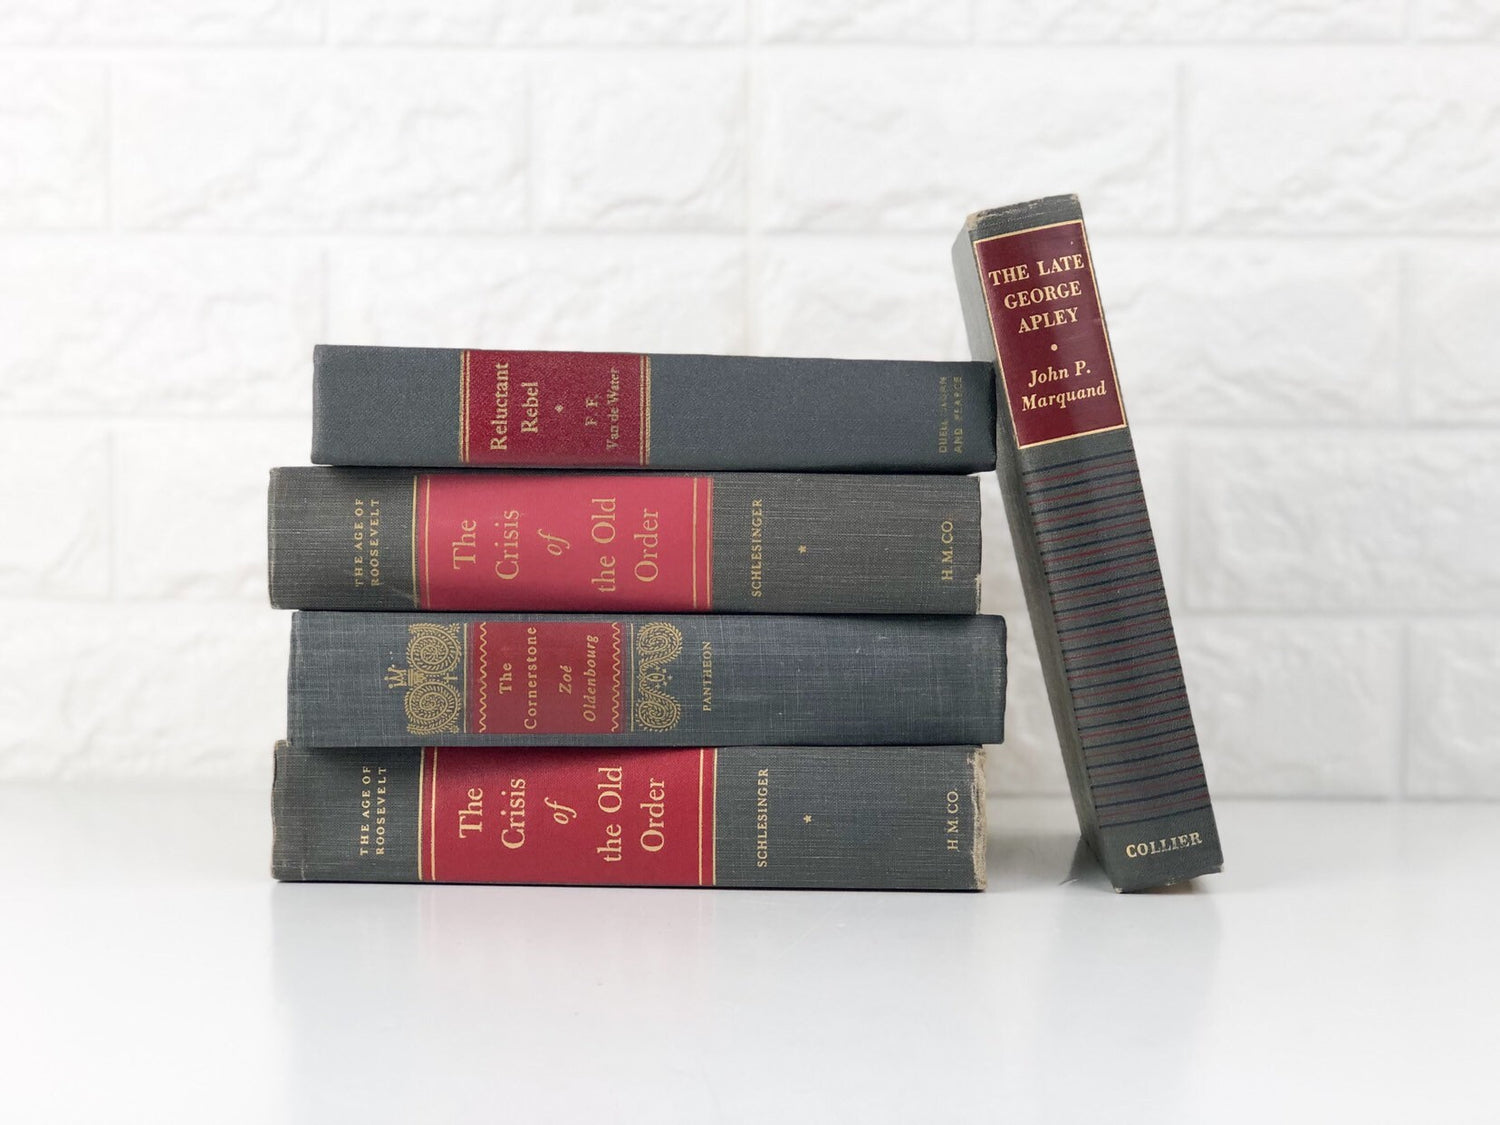 Book Bundle, Shelf Accessories, Red Books for Home Decor, Vintage Book Stack